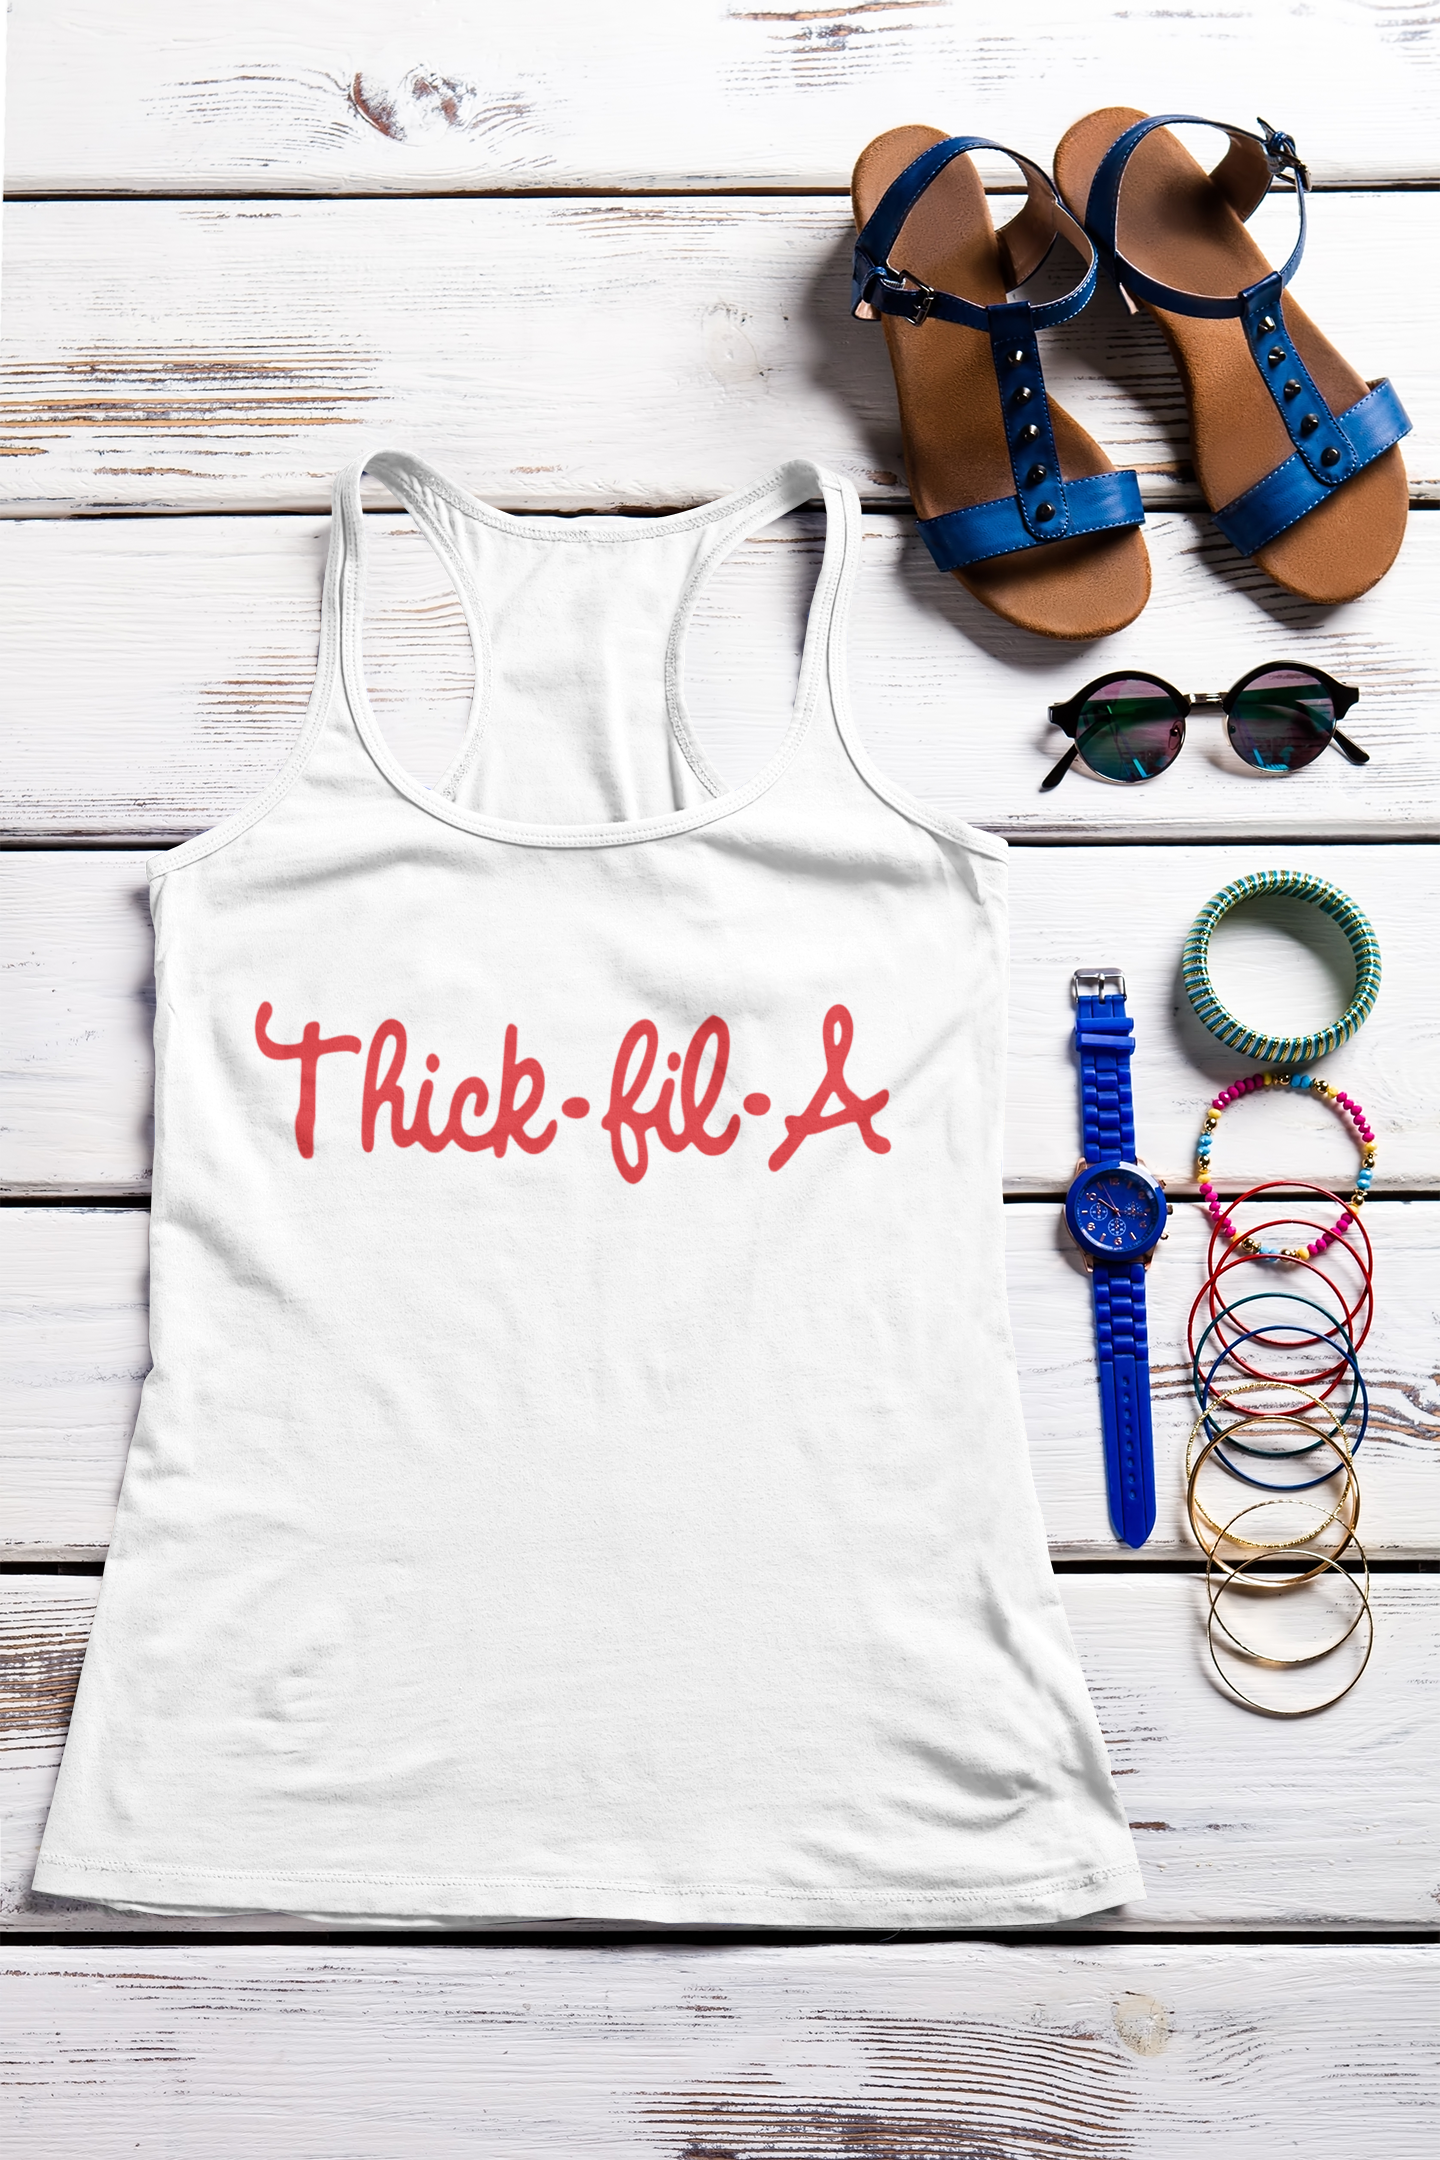 Thick-fil-A T-Shirts(Only)